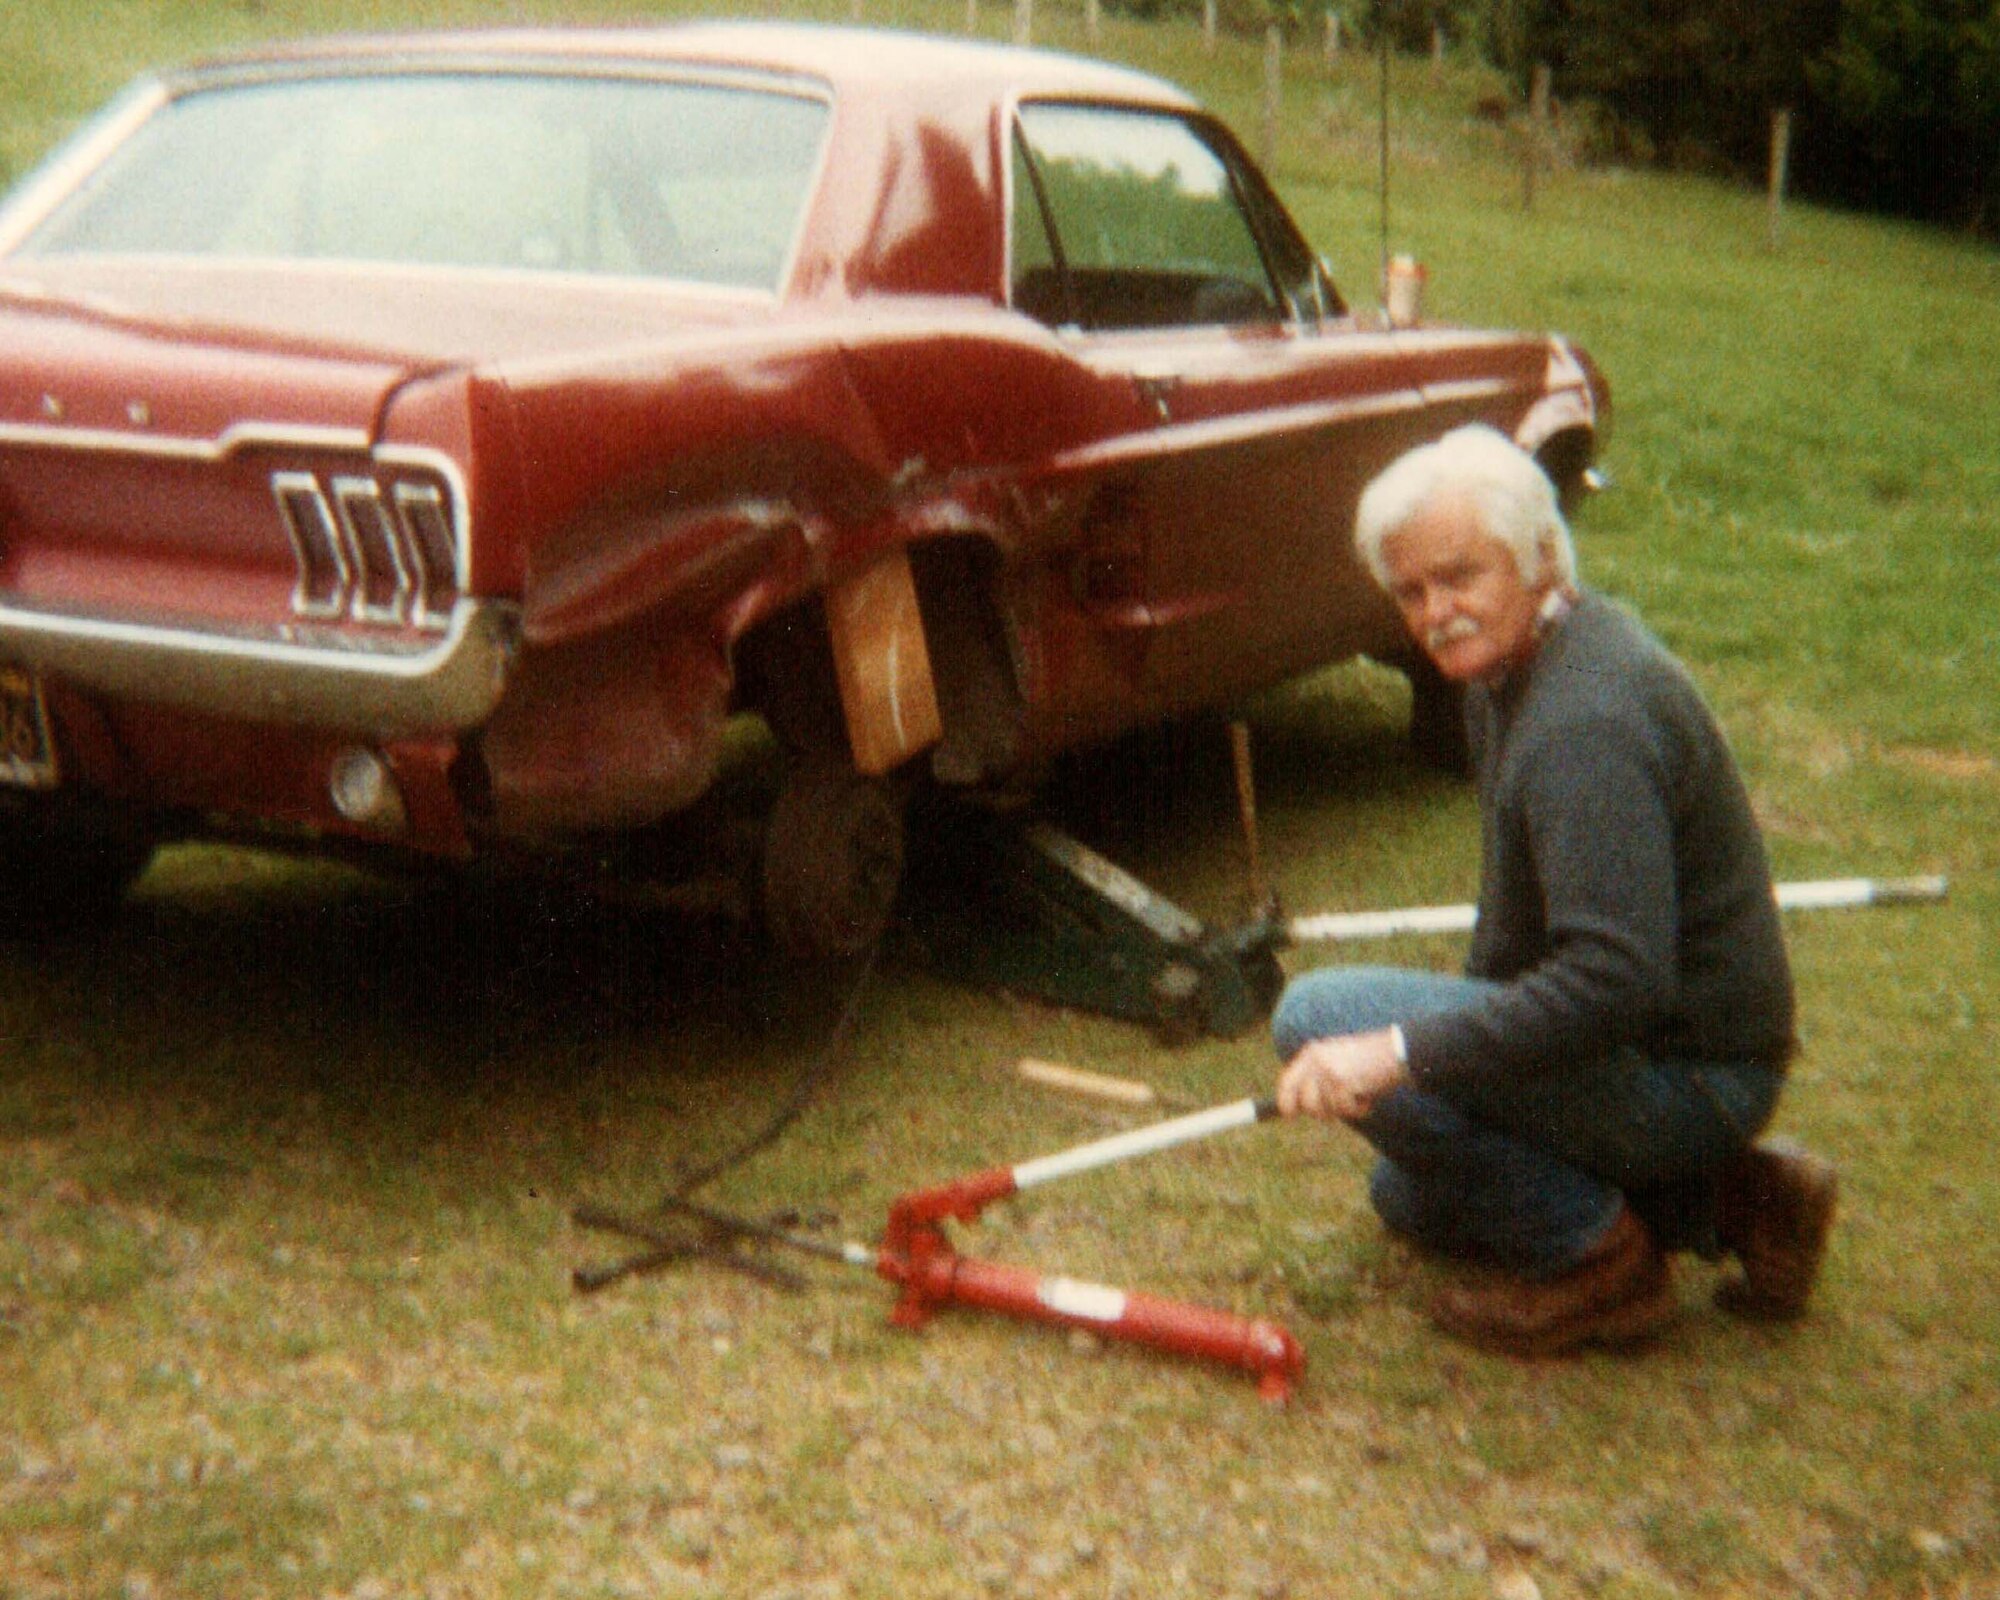 George G. Shaw poses for a photo while repairing the courter panel on a 1967 Ford mustang, 1988, at his home in Arcata, Calif. Shaw built the mustang for his daughter as her first car, and the vehicle was later passed on to his granddaughter. (Courtesy photo)